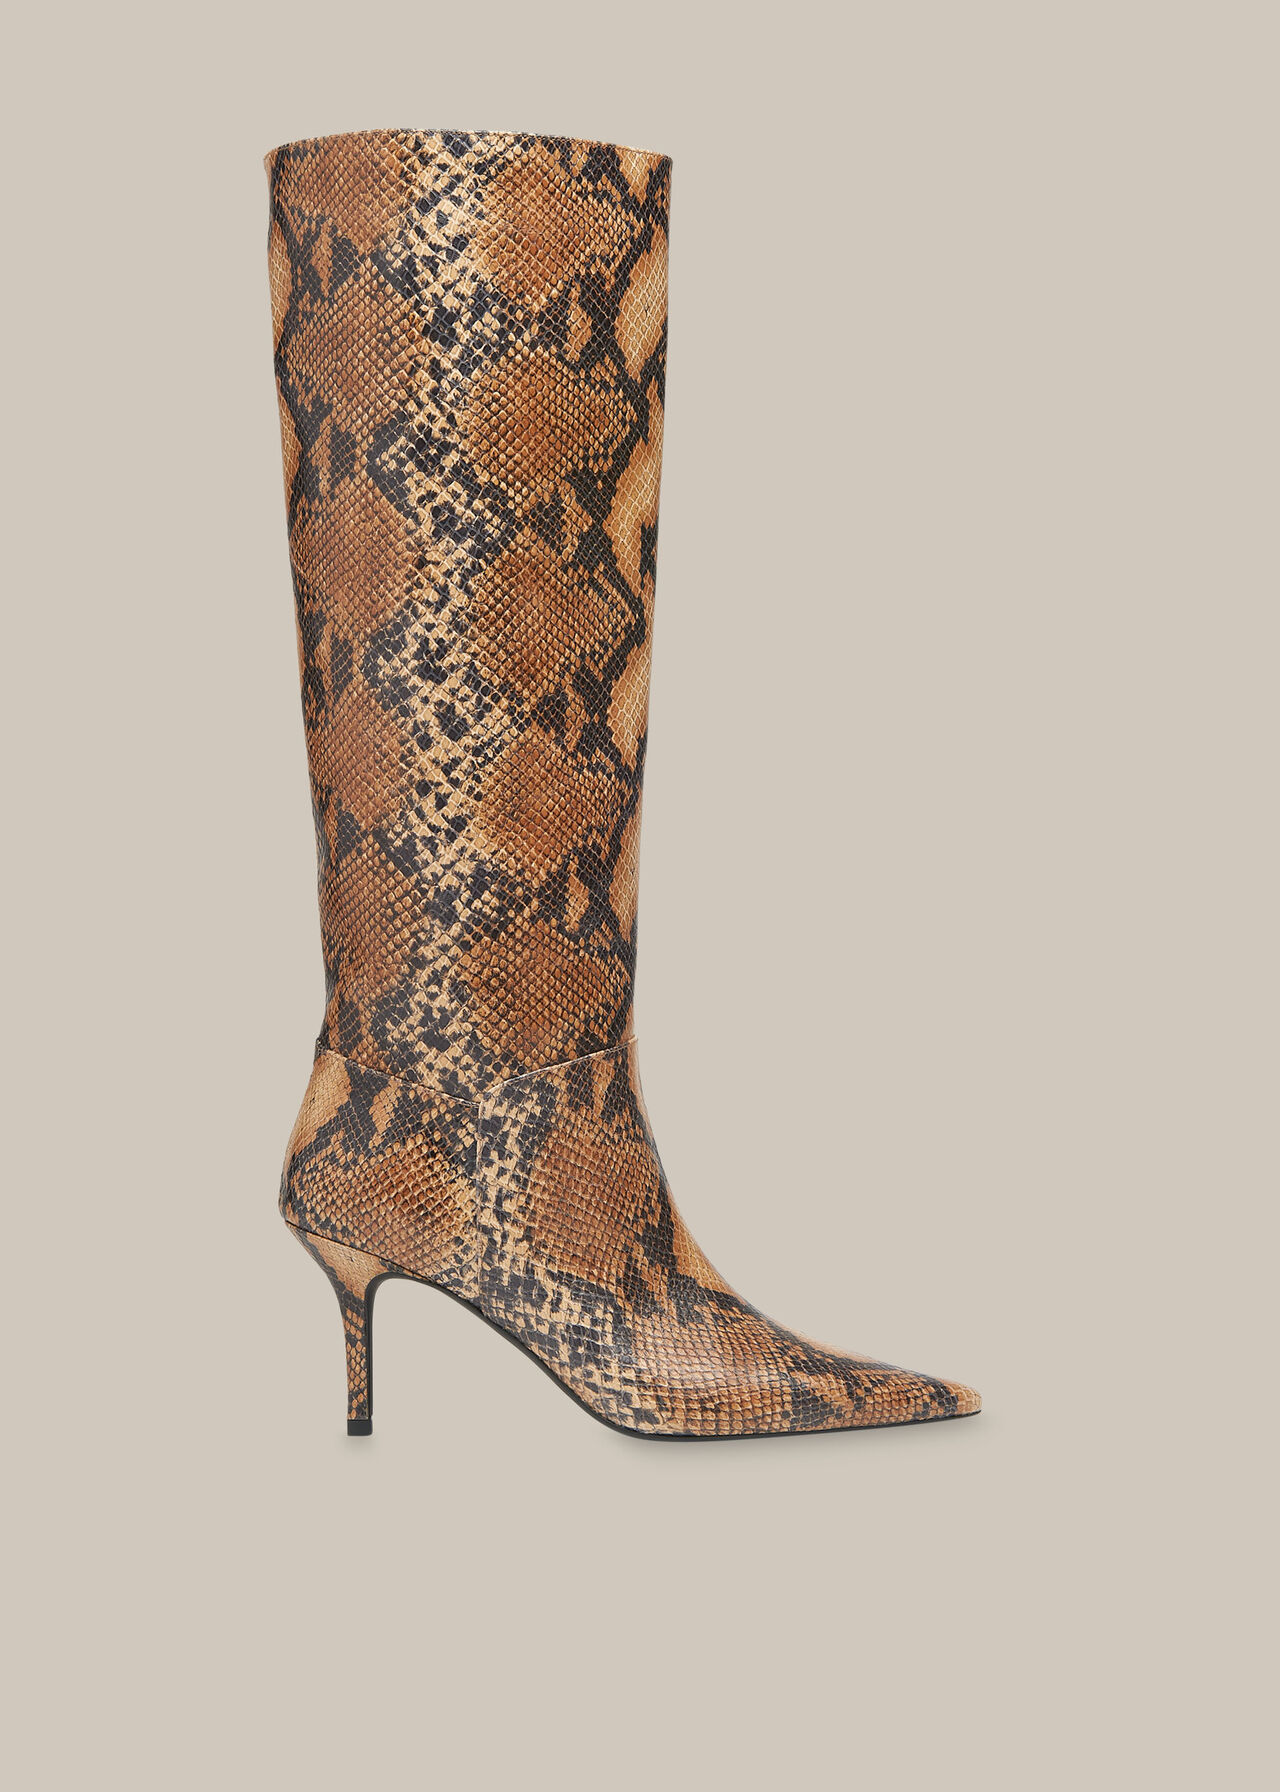 Conna Snake Knee High Boot Brown/Multi